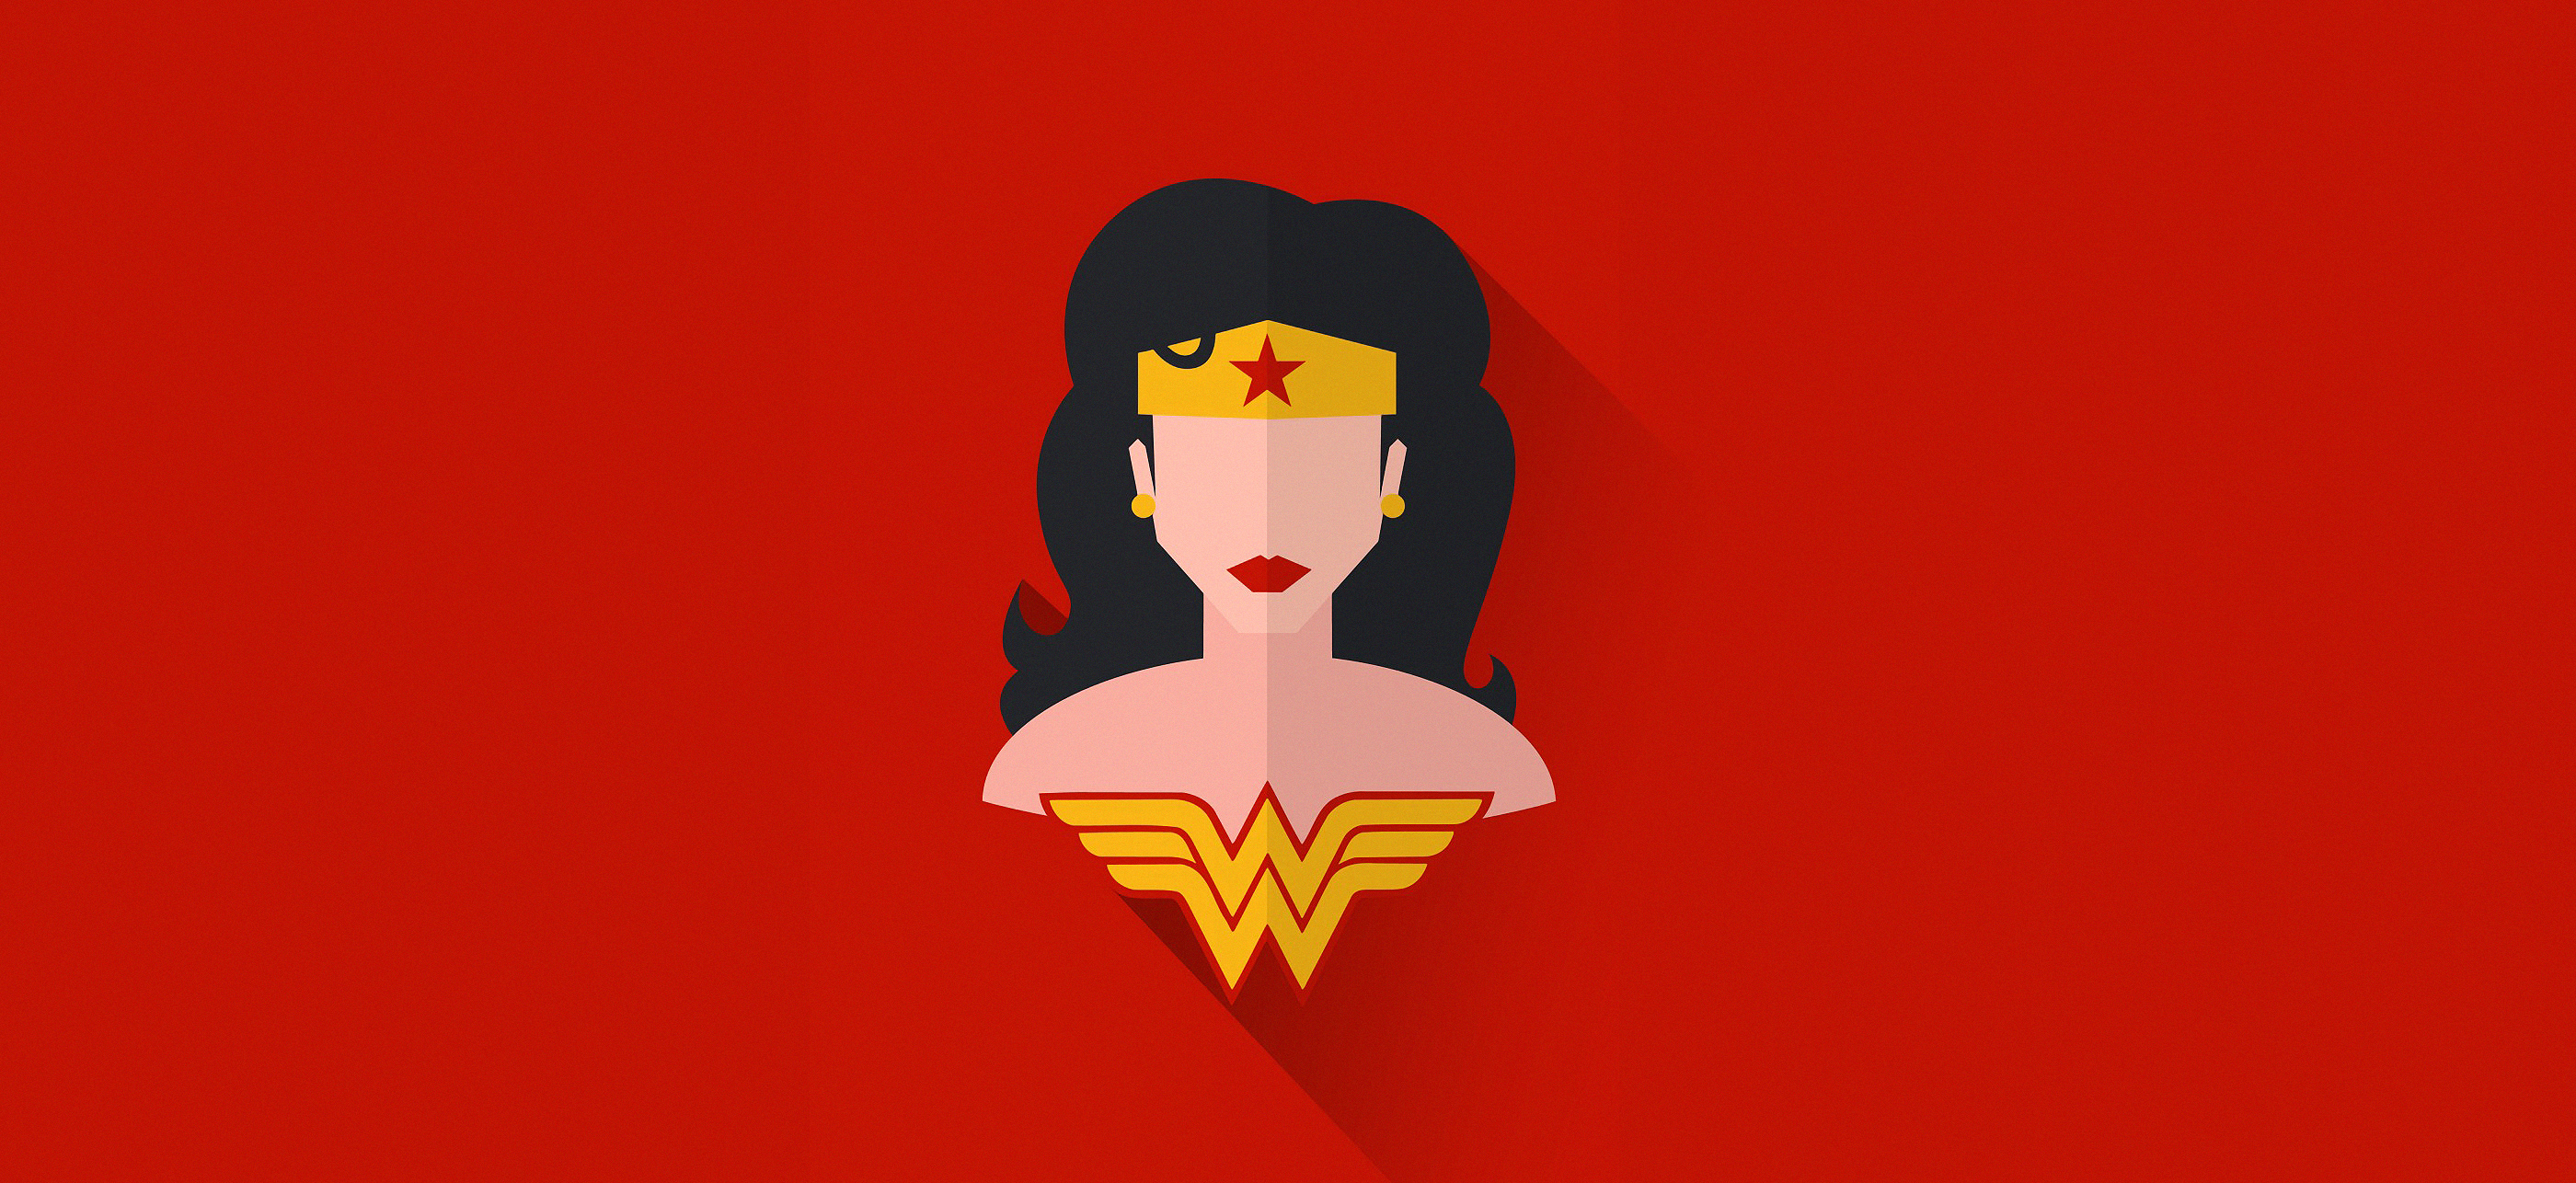 Wonder Woman Minimal Art, HD Superheroes, 4k Wallpaper, Image, Background, Photo and Picture